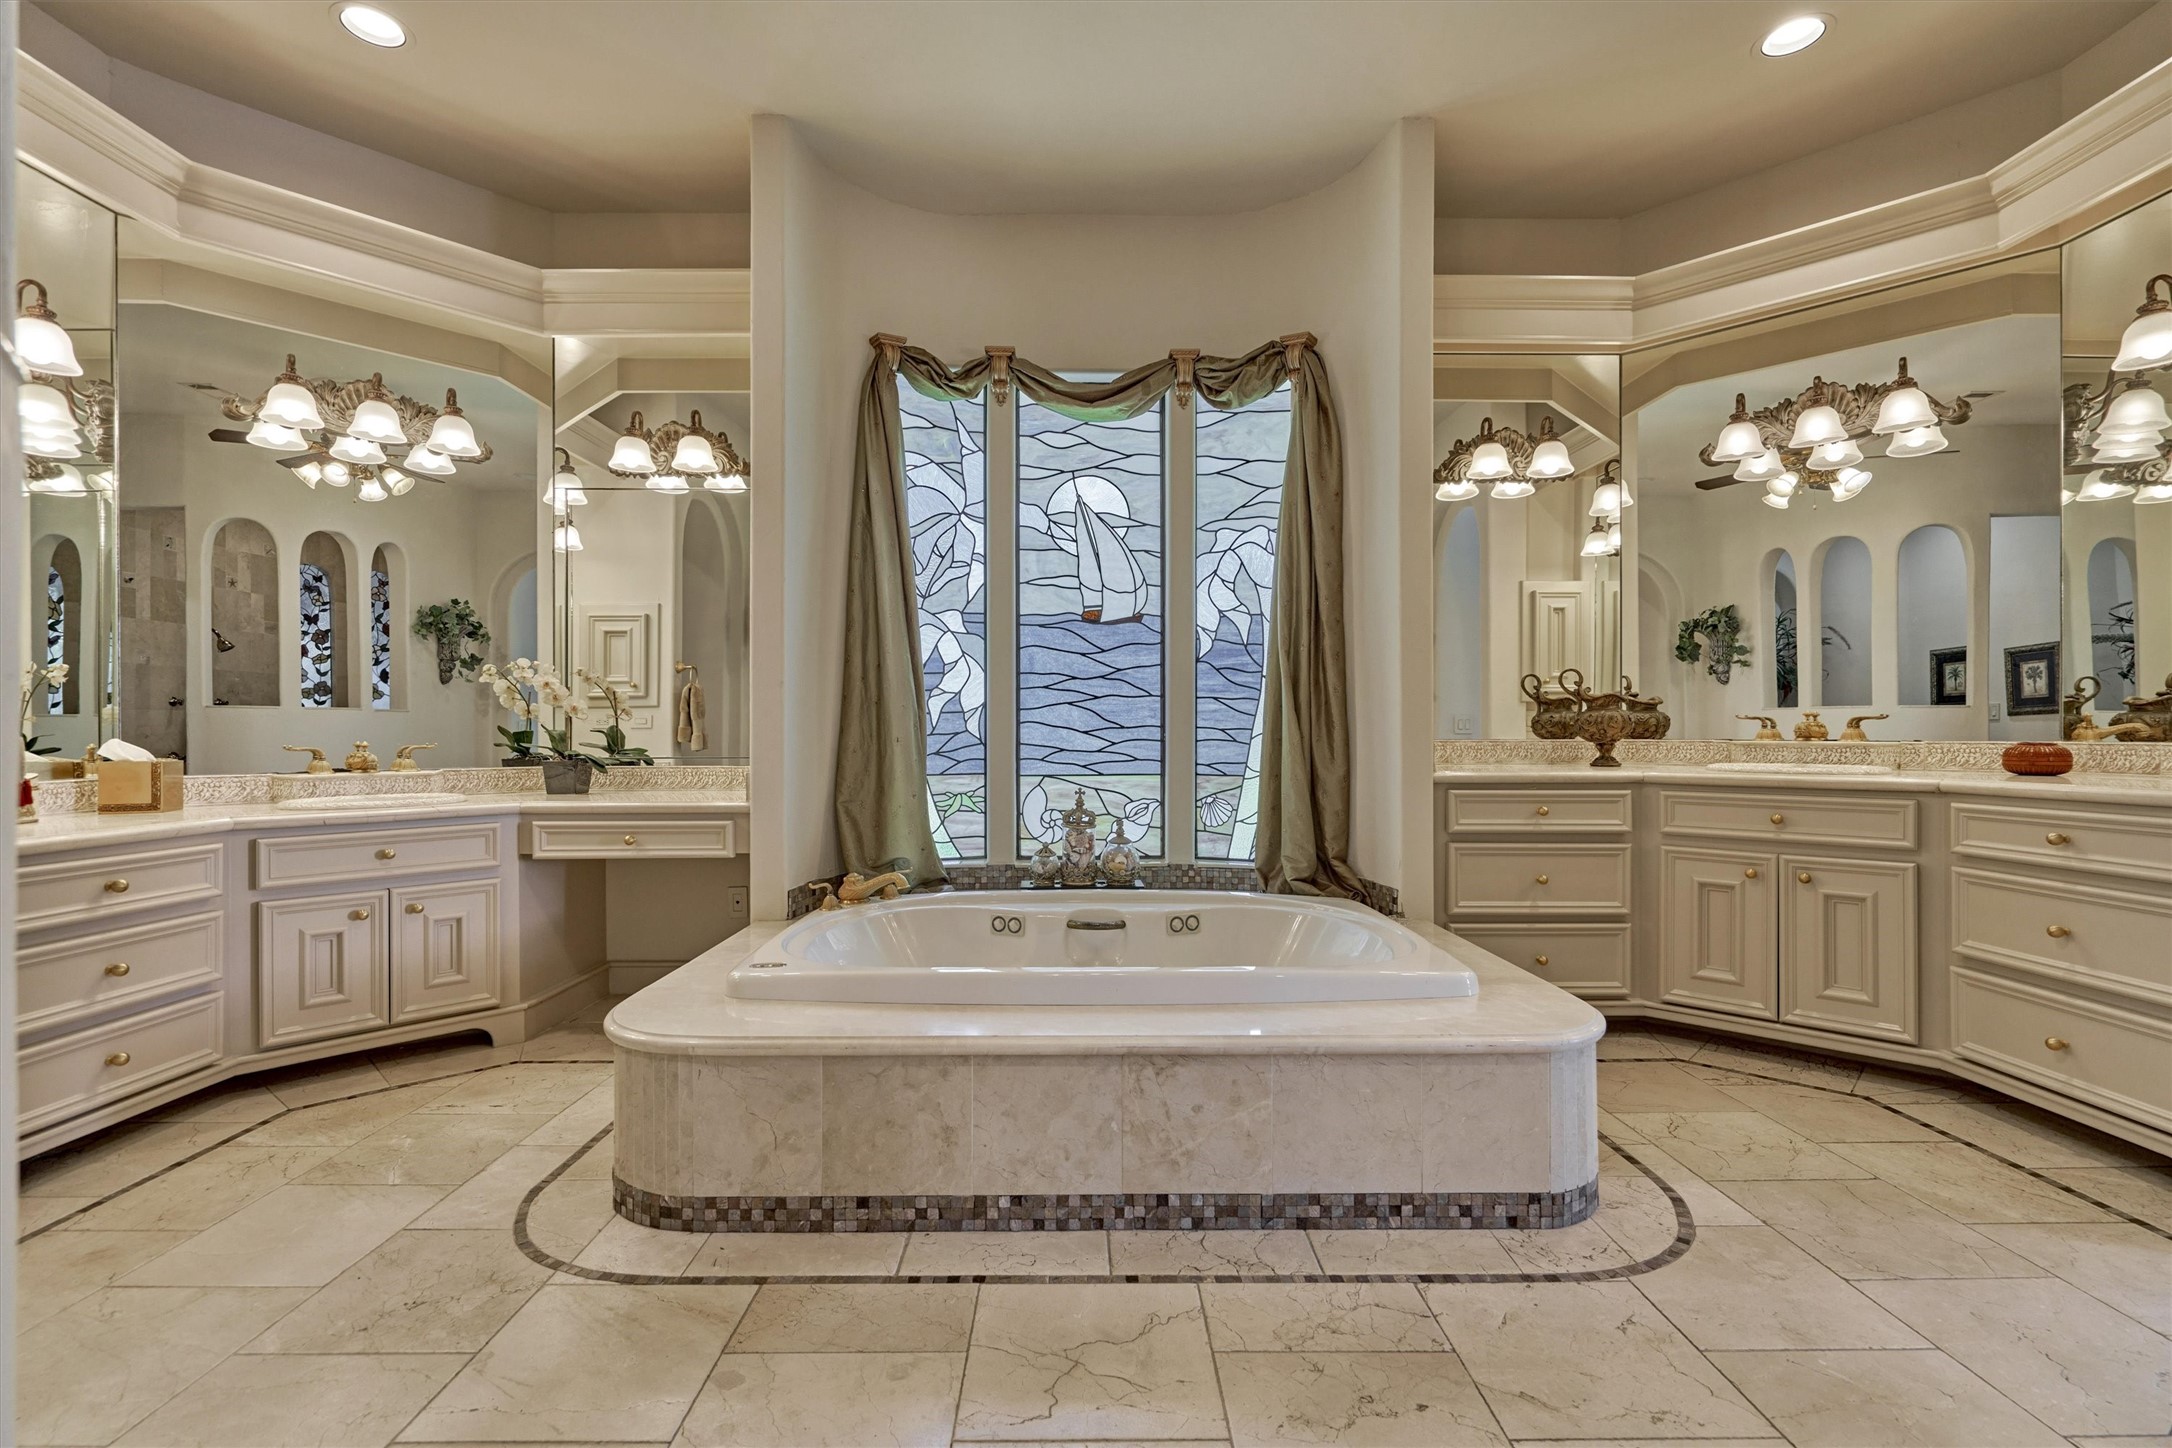 Master Bath Jacuzzi Tub for 2 & Stained Glass Window